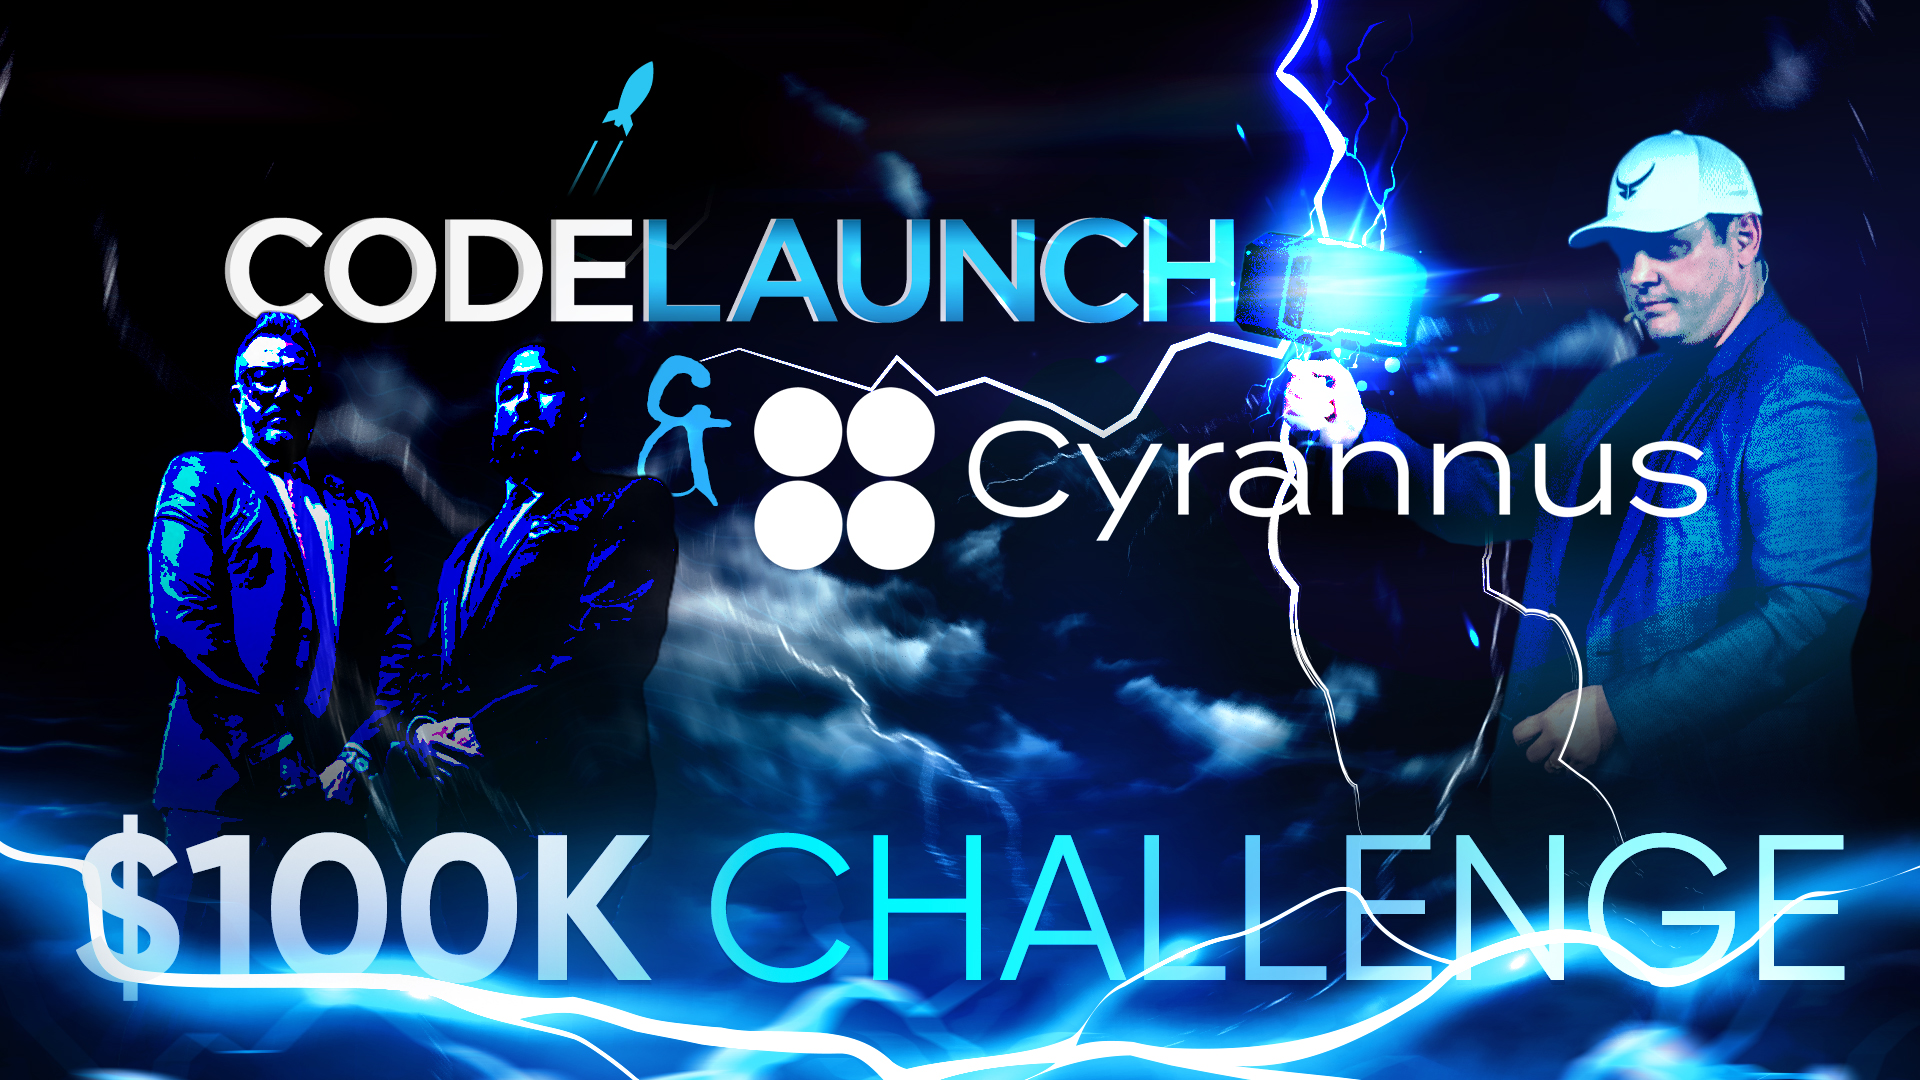 Cyrannus Pledges $100,000 to a Future CodeLaunch Startup! Could You Be the Winner?